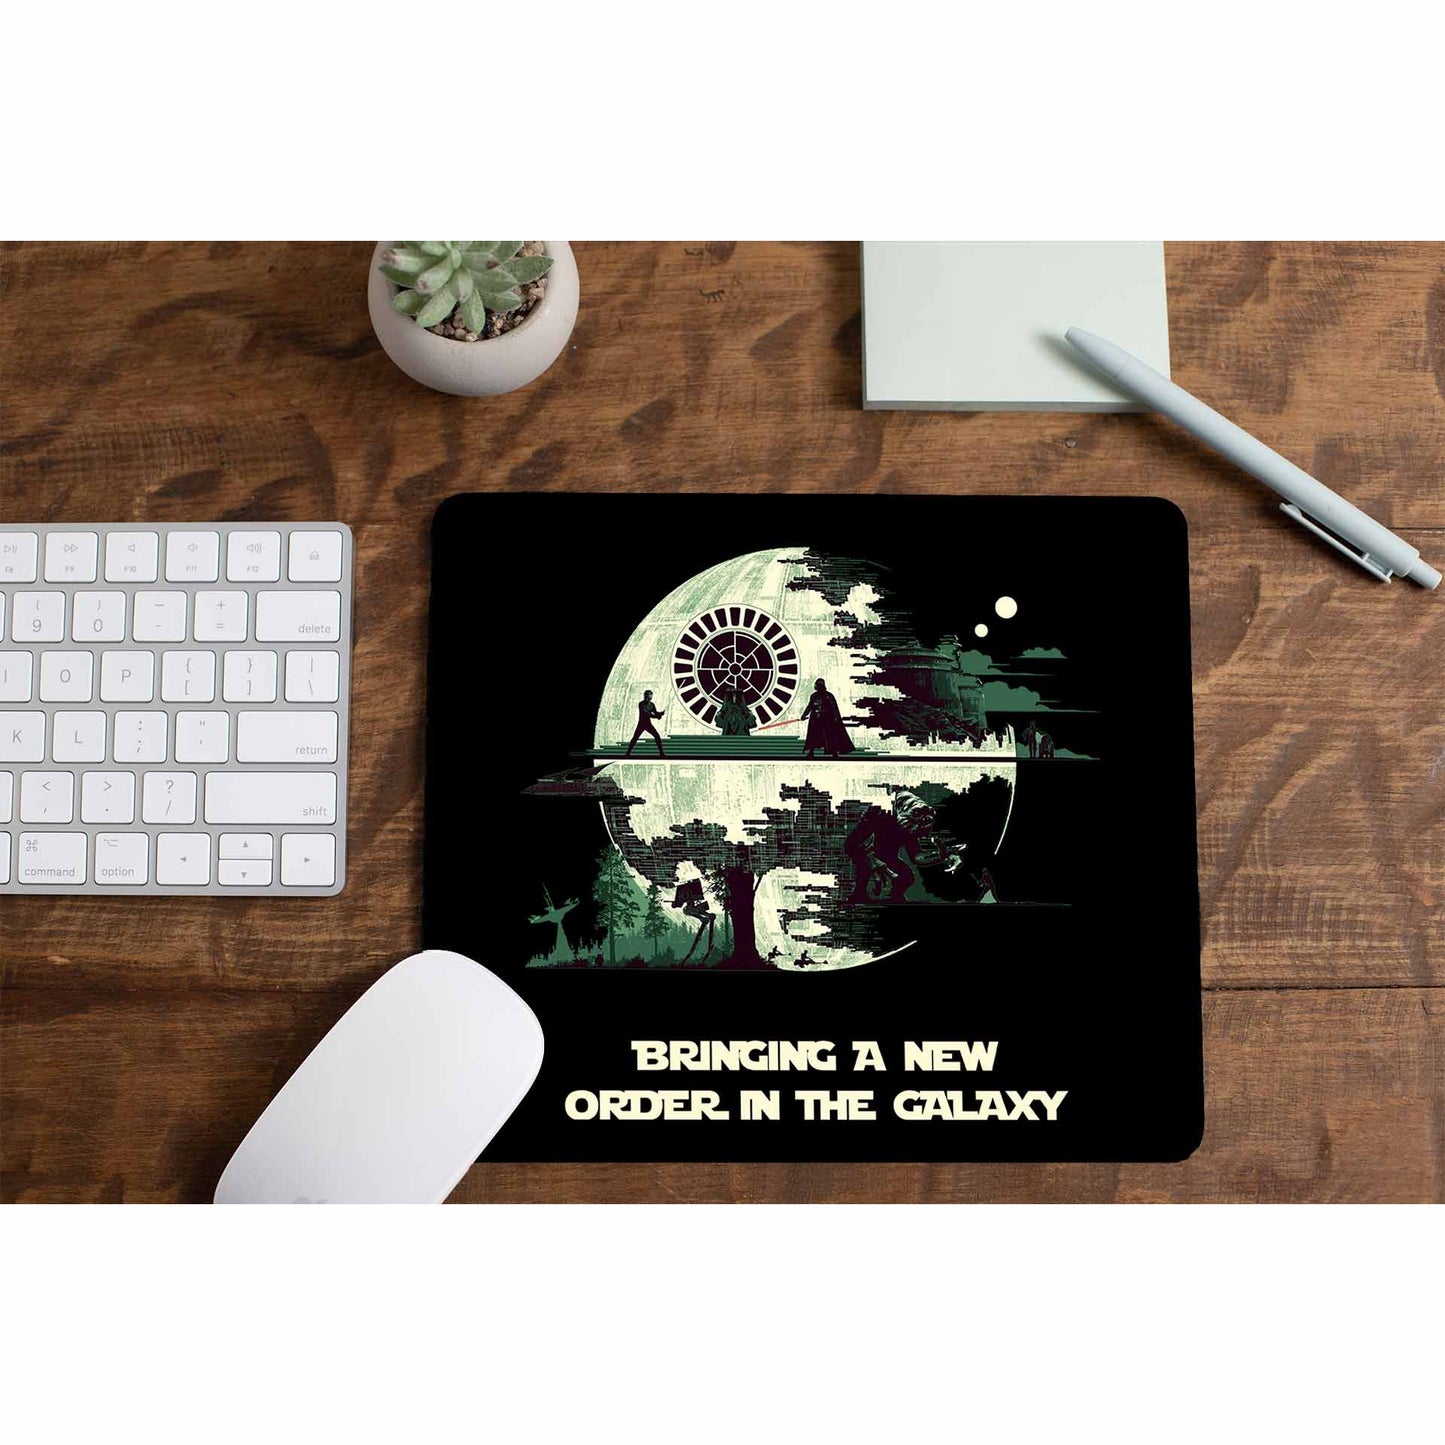 star wars a new order in the galaxy mousepad logitech large anime tv & movies buy online india the banyan tee tbt men women girls boys unisex